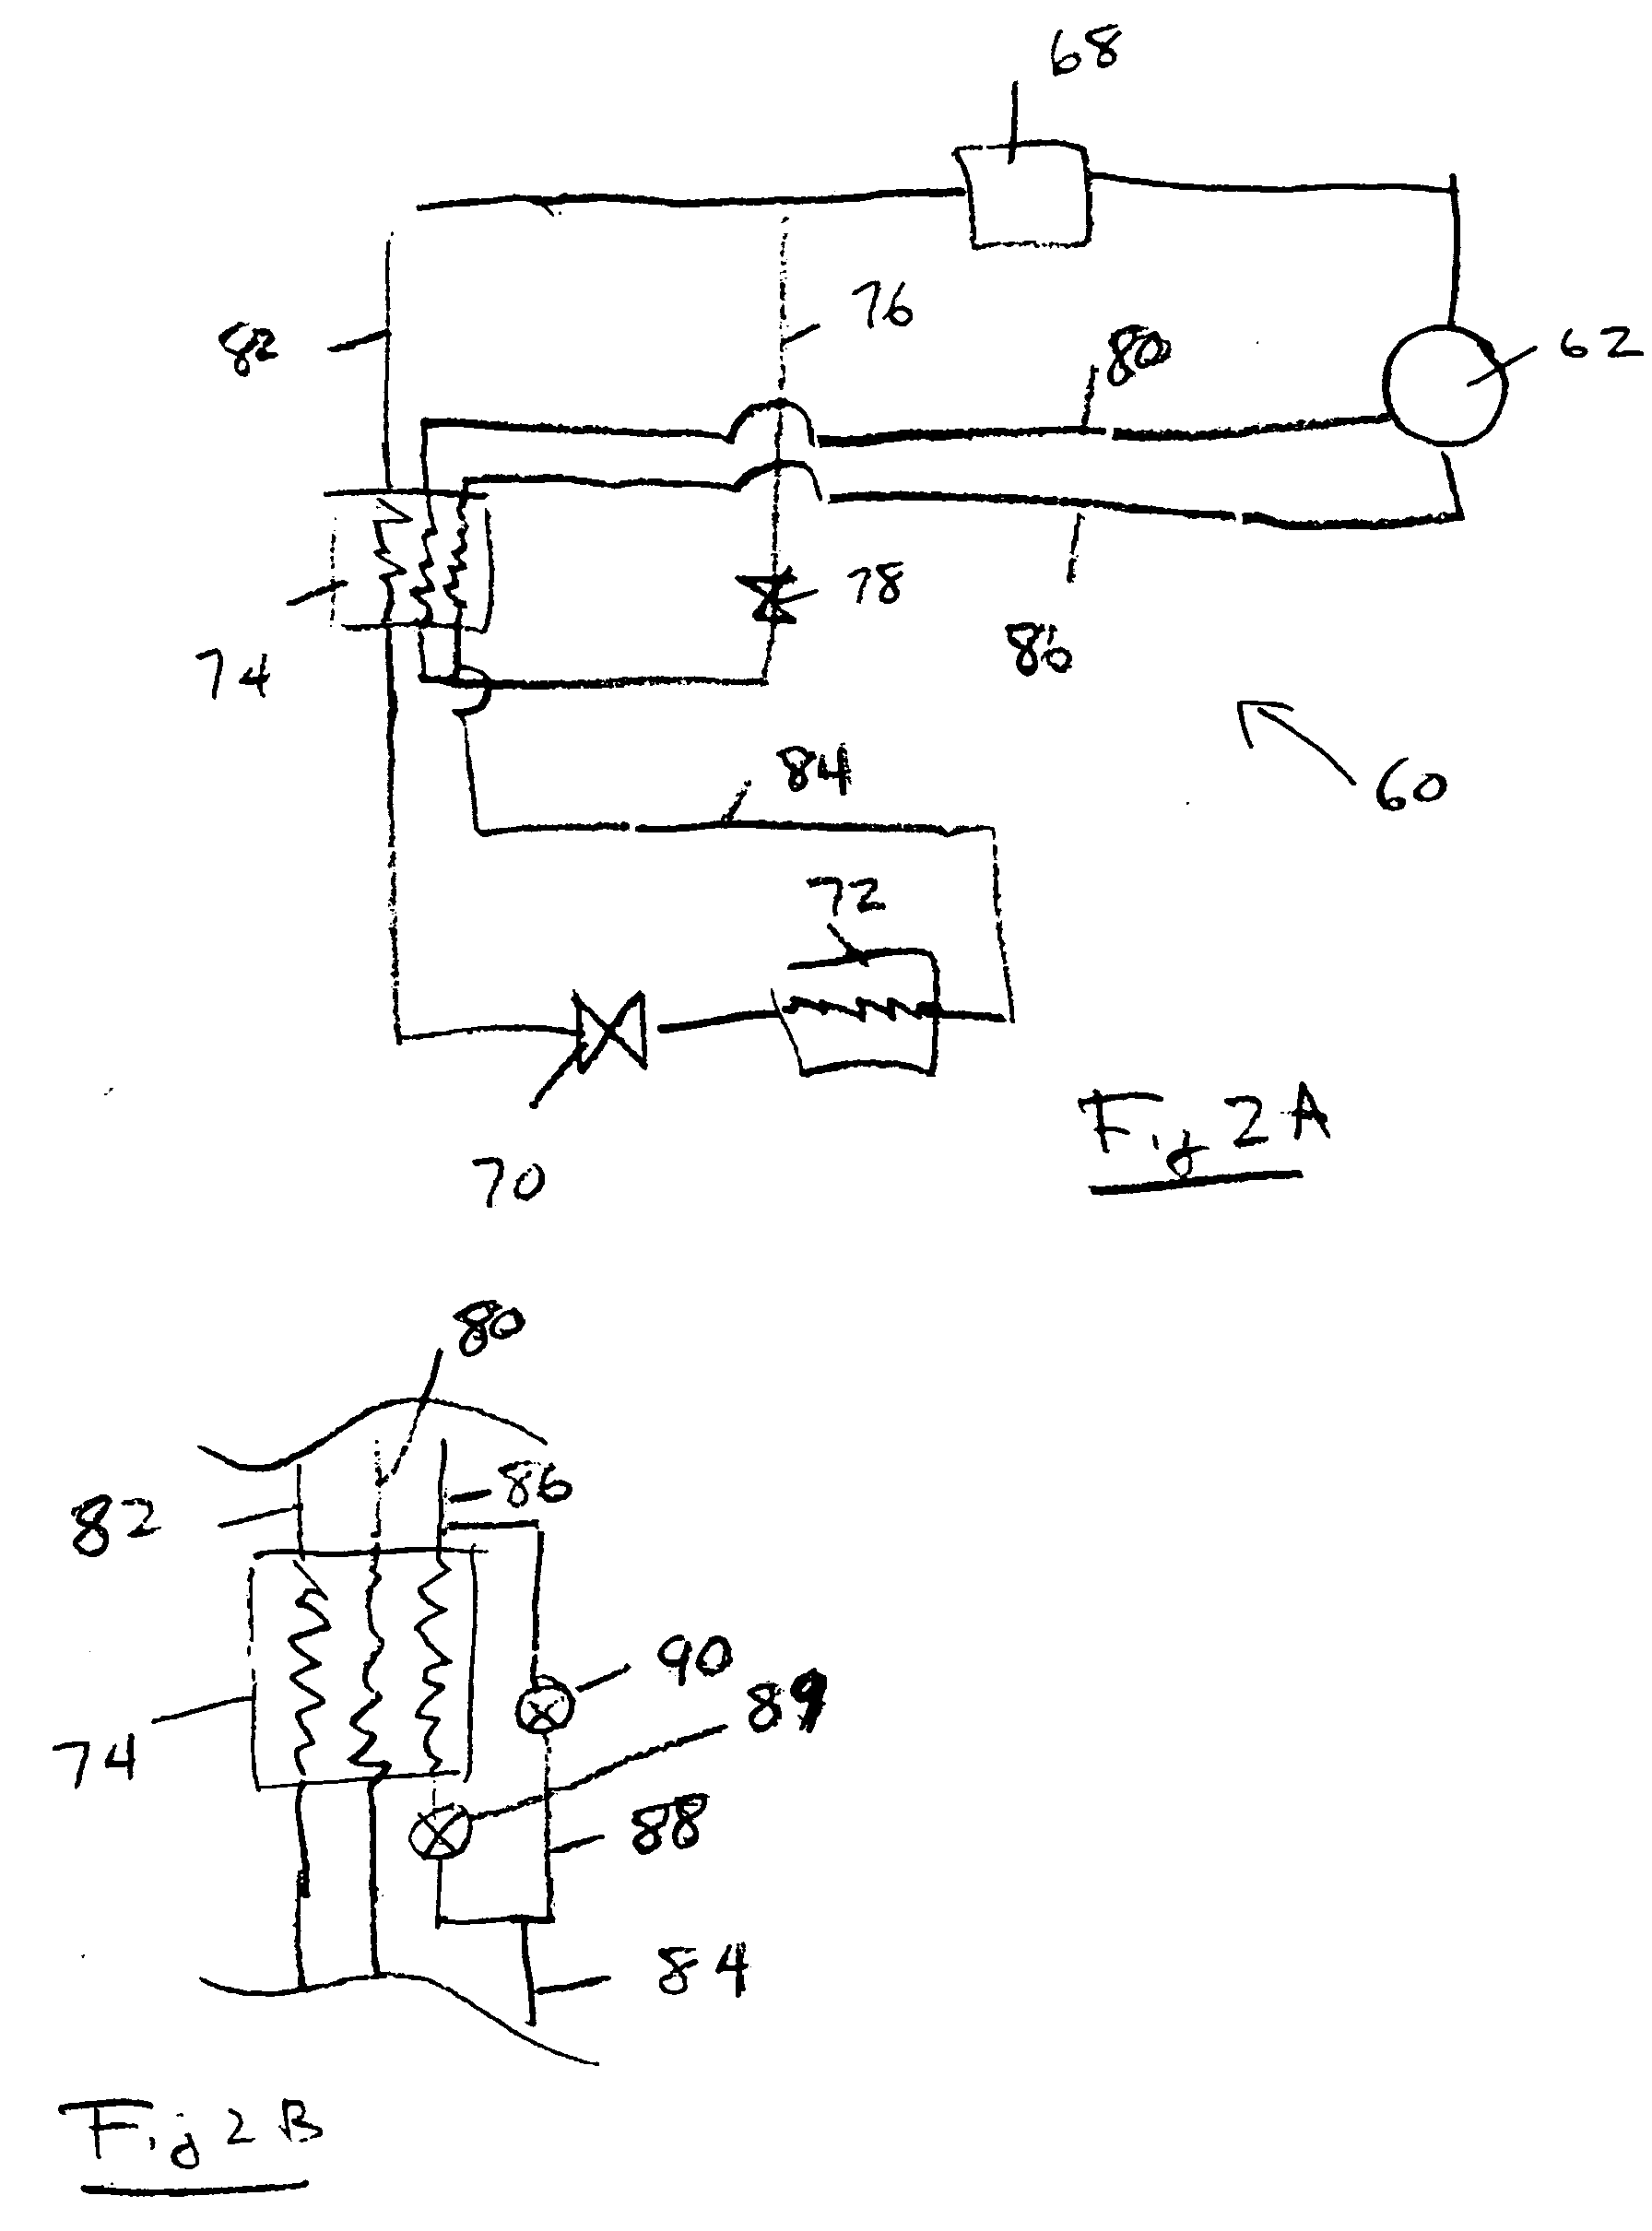 Refrigerant system with common economizer and liquid-suction heat exchanger